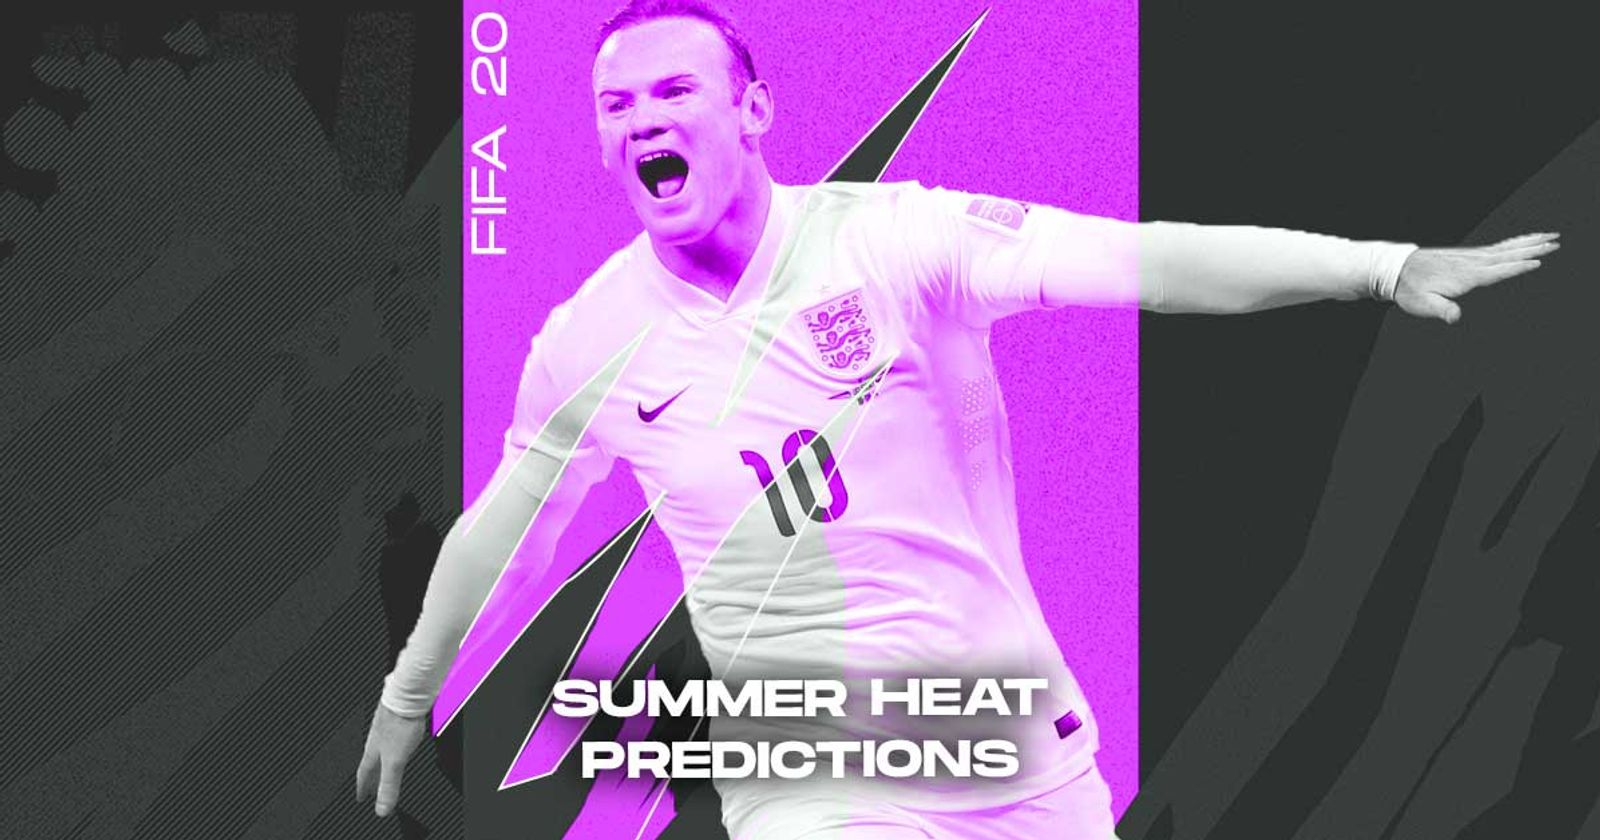 FIFA 20 Summer Heat goes out with a bang - Dexerto